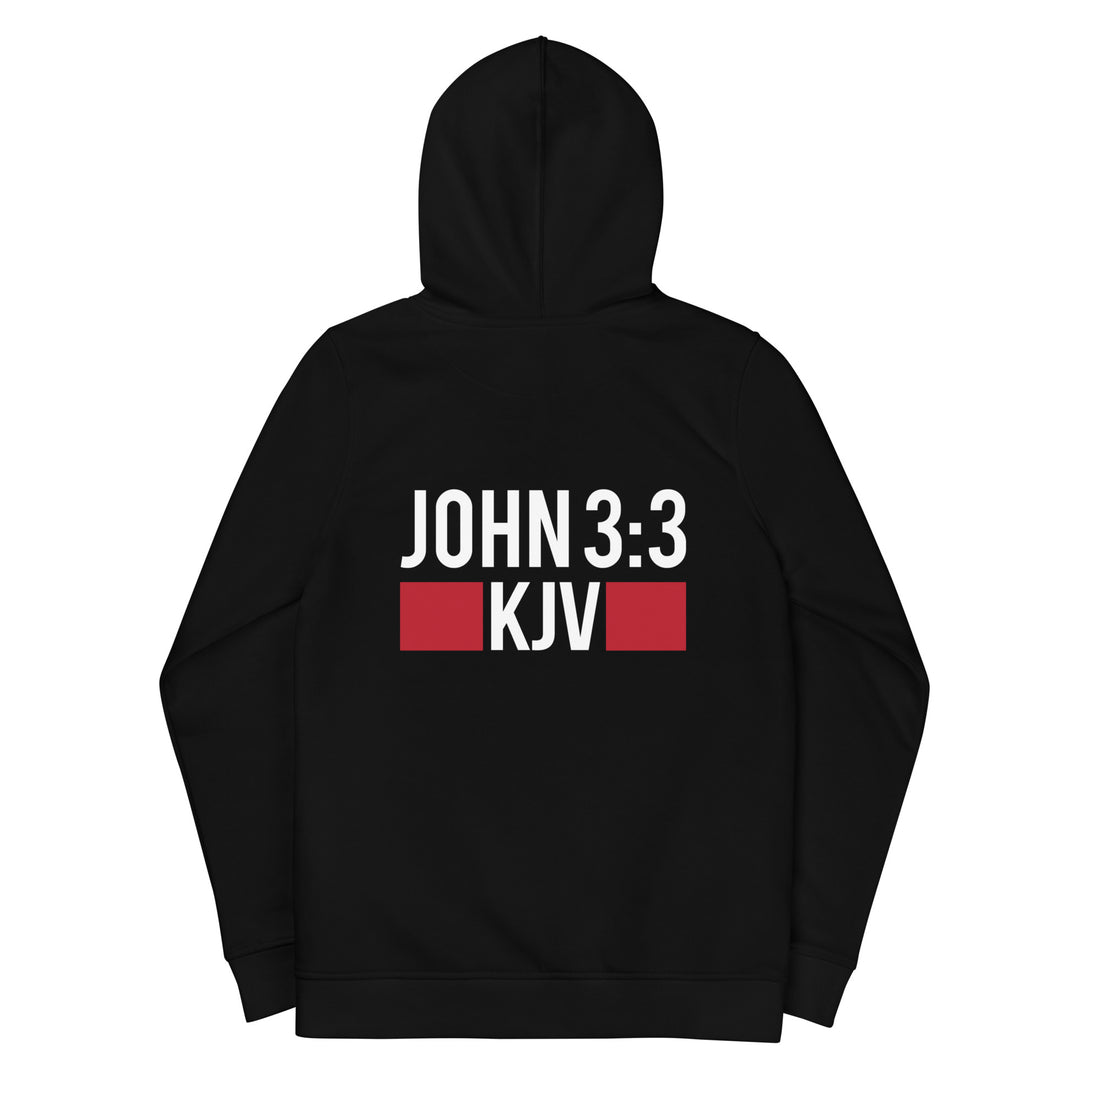 BORN AGAIN WOMENS FRONT AND BACK HOODIE